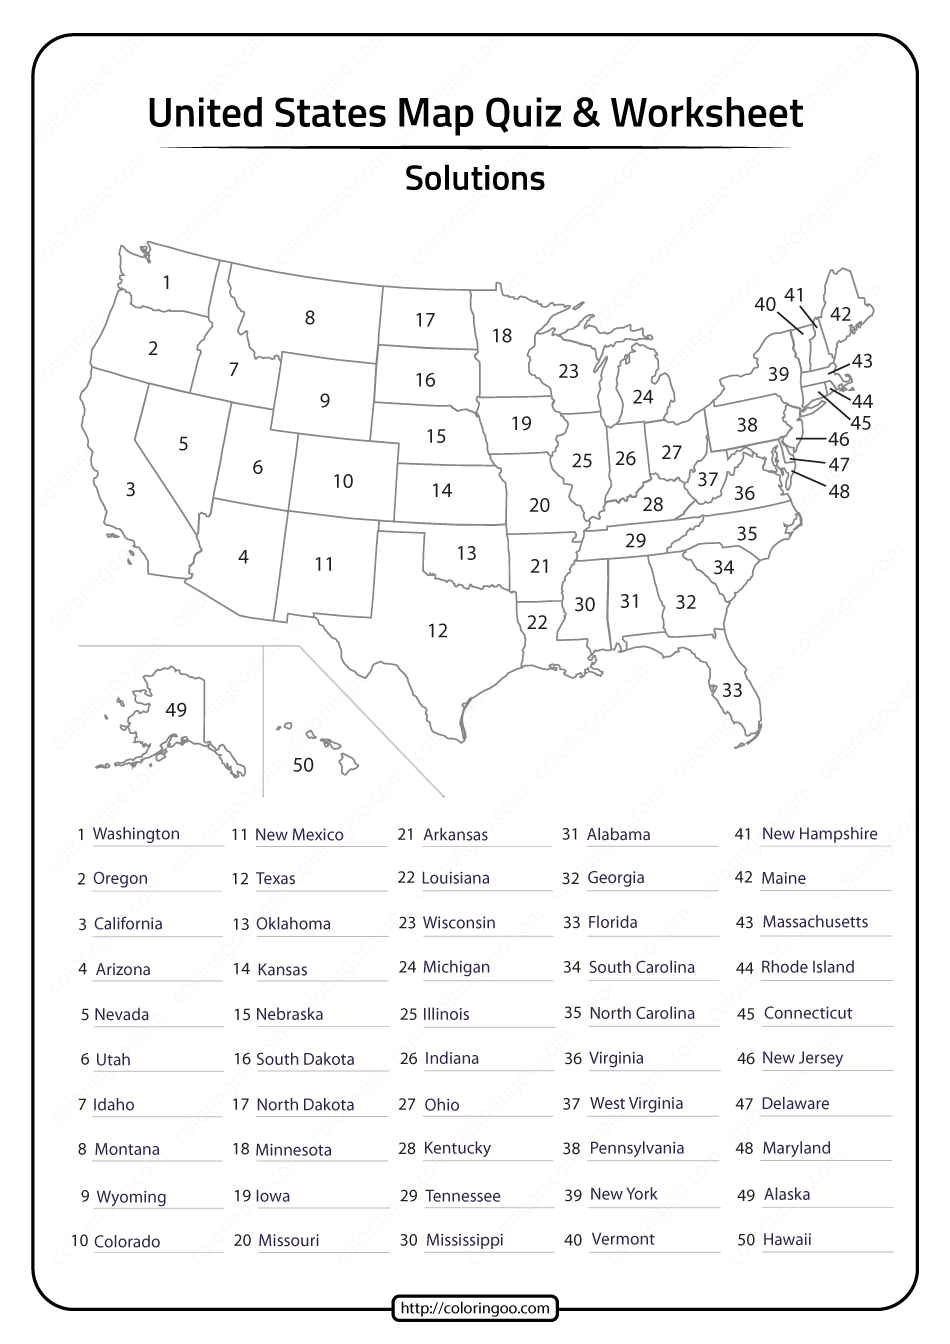 free printable united states map quiz solutions